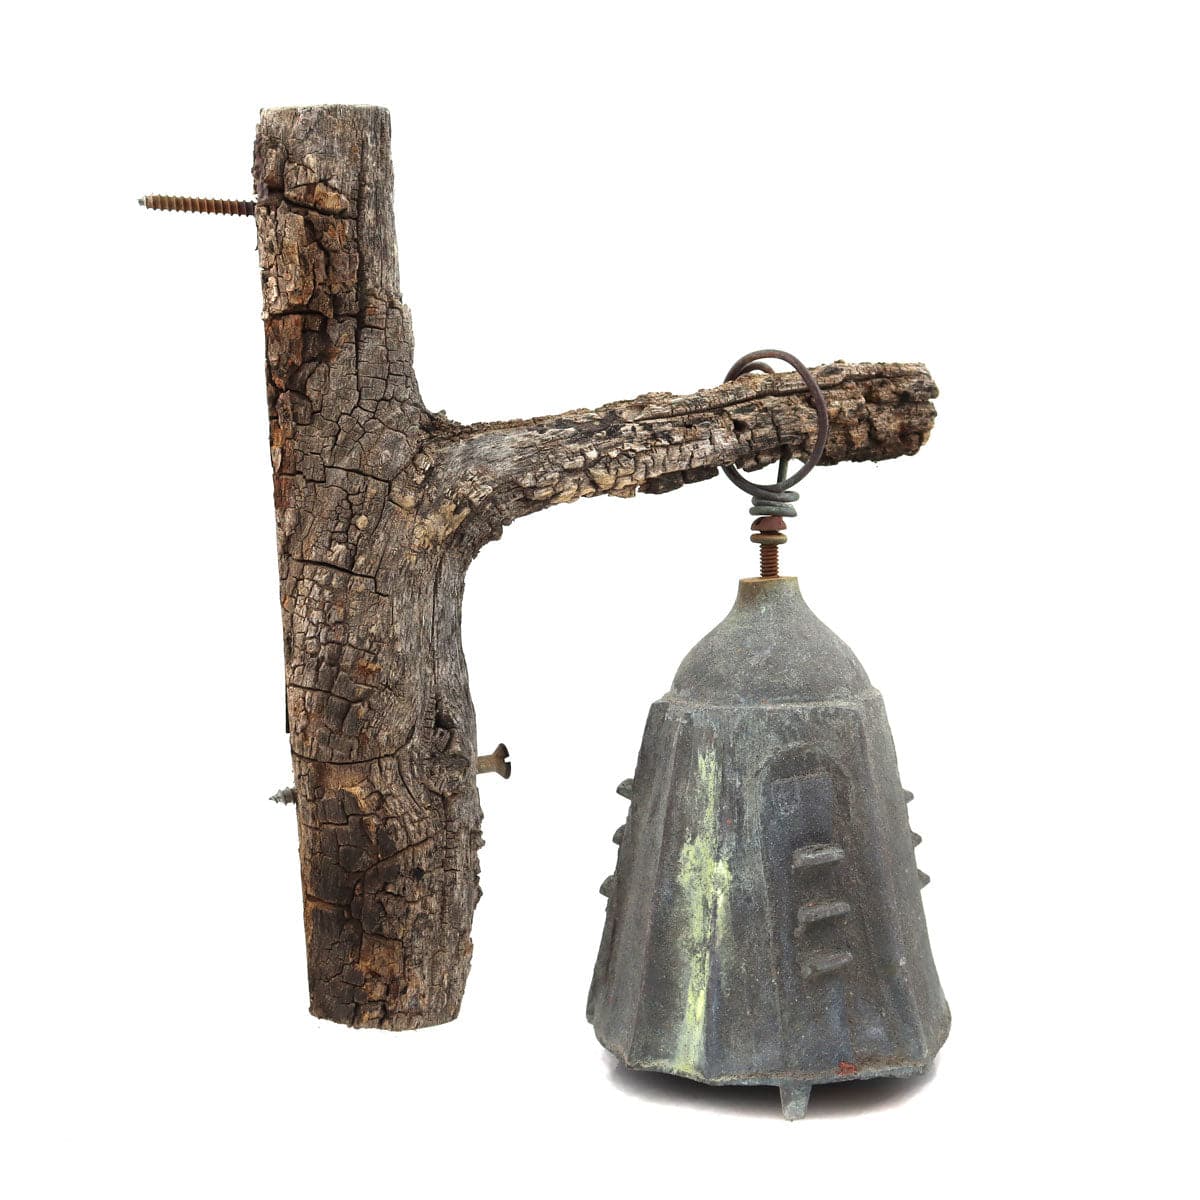 Attributed to Paolo Soleri (1919-2013) Chime Bell on Wooden Branch (M91996C-1121-009)2